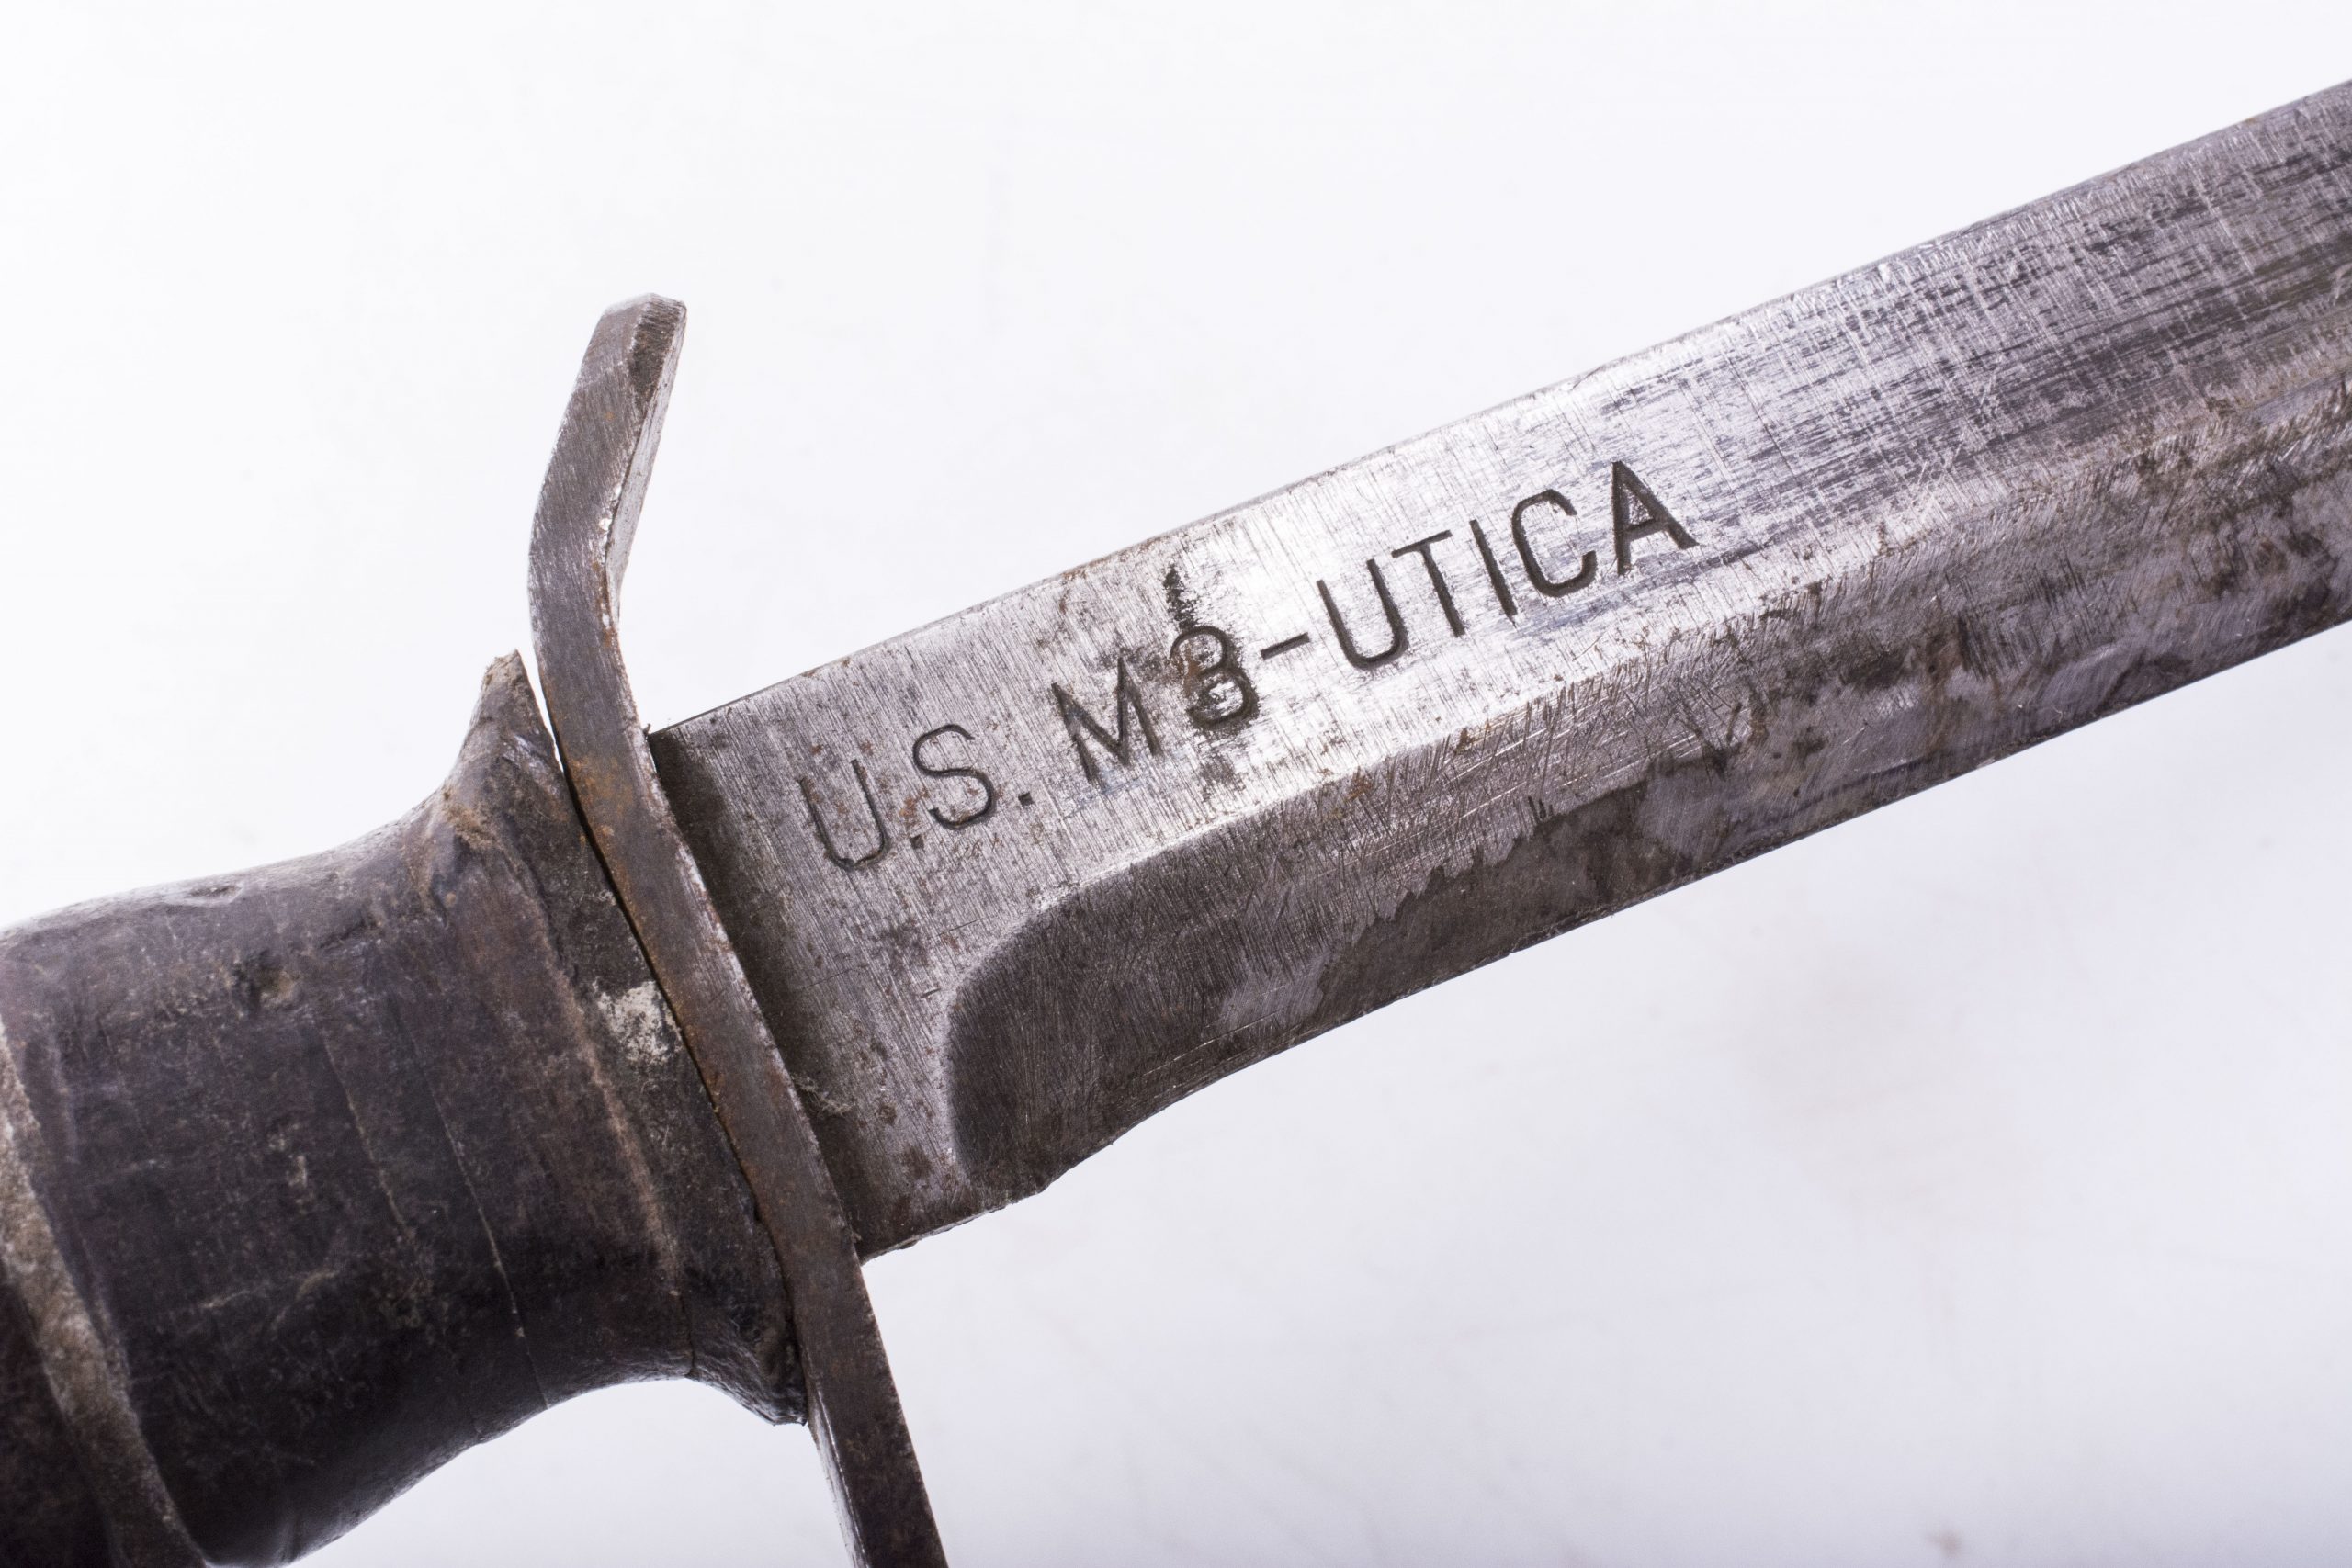 US M3 Knife by Utica with leg strap – fjm44